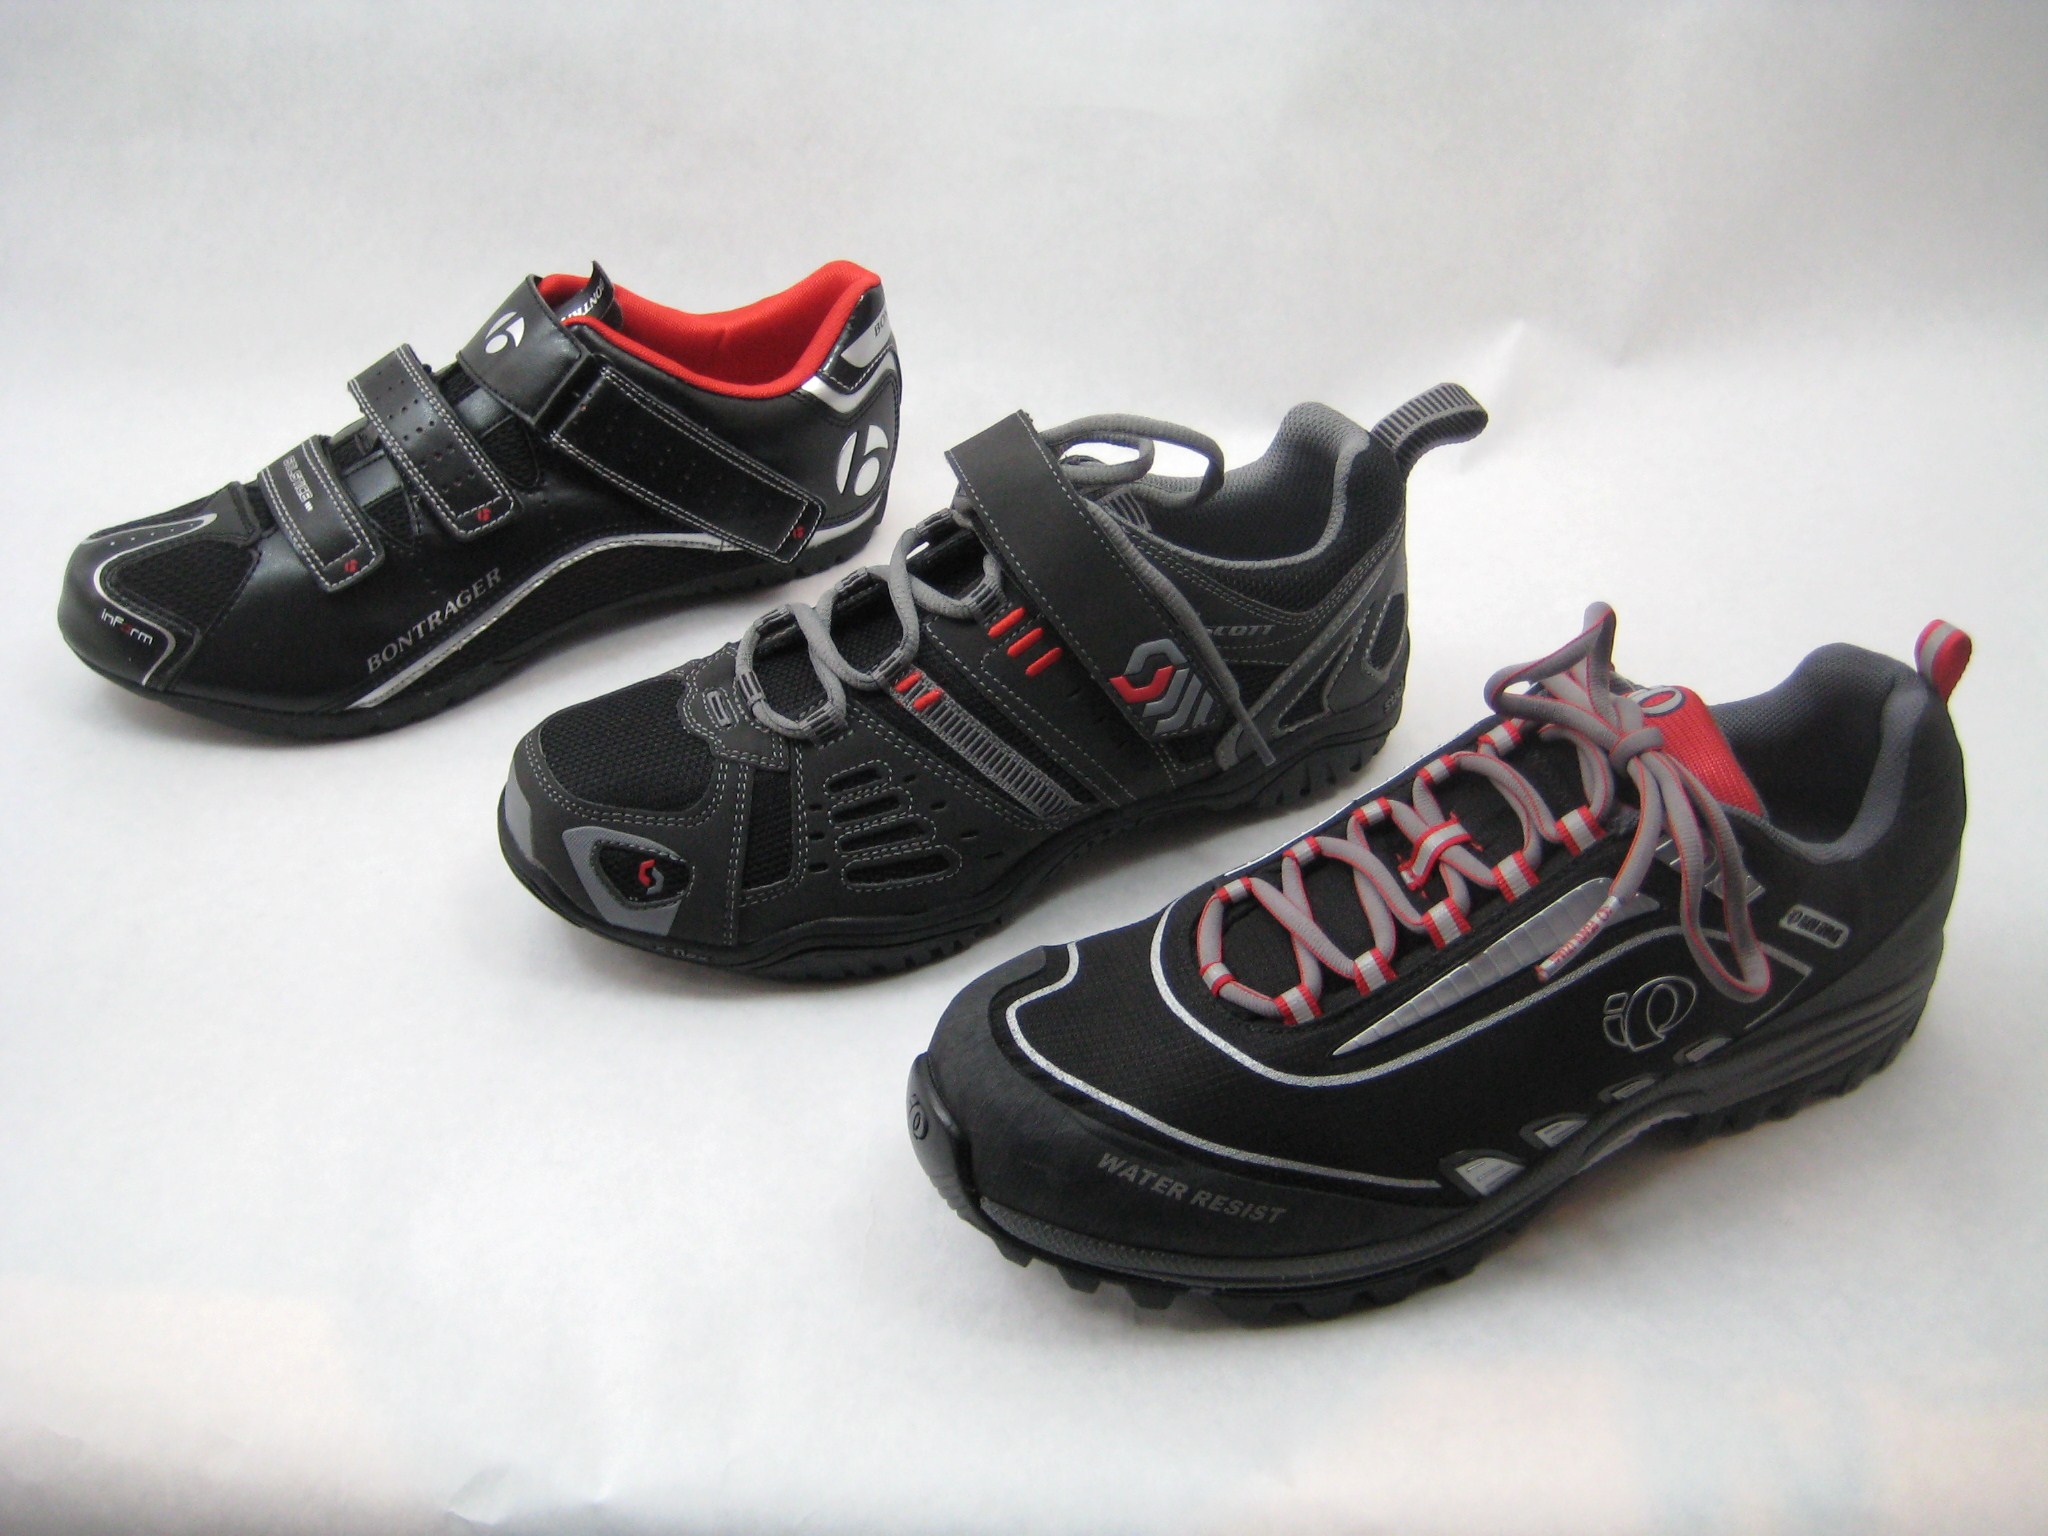 bicycle shoes without cleats